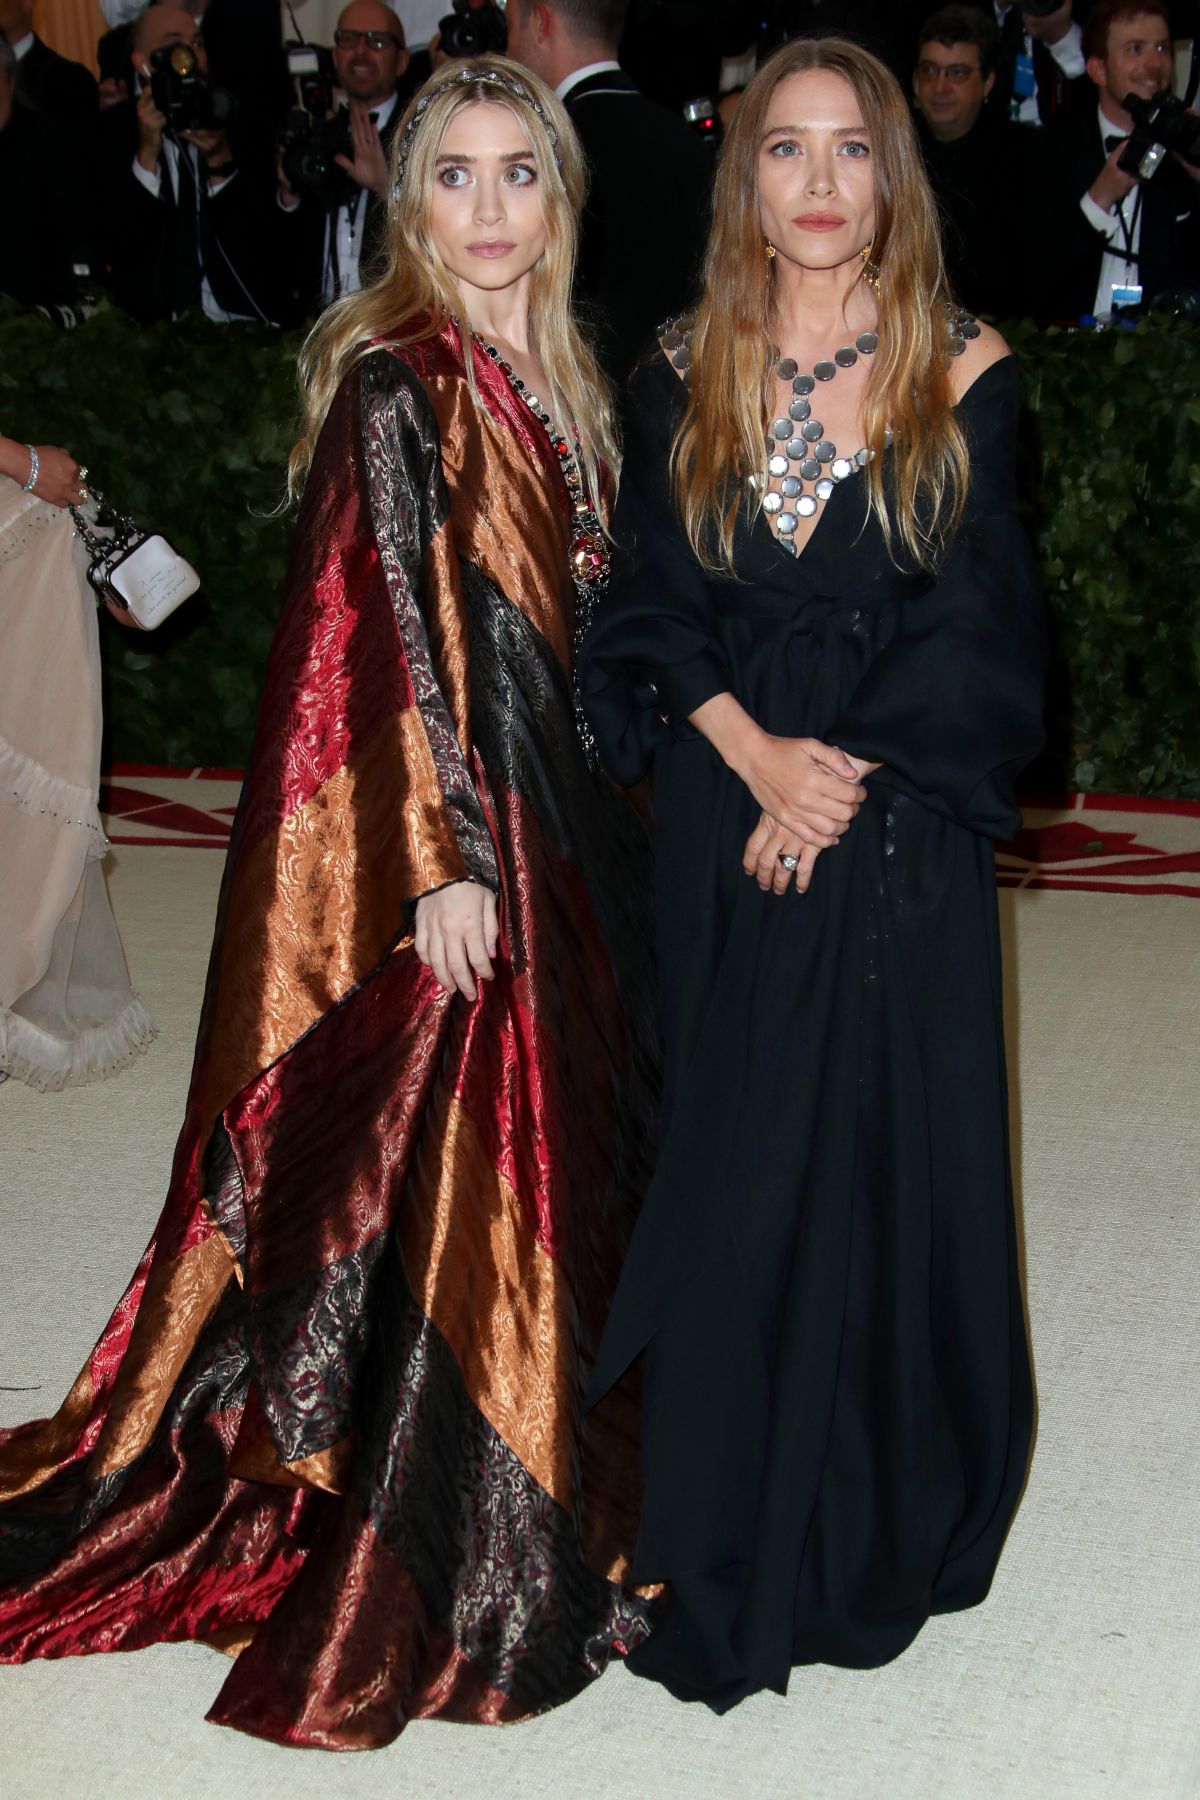 MARY KATE and ASHLEY OLSEN at MET Gala 2018 in New York 05/07/2018 ...